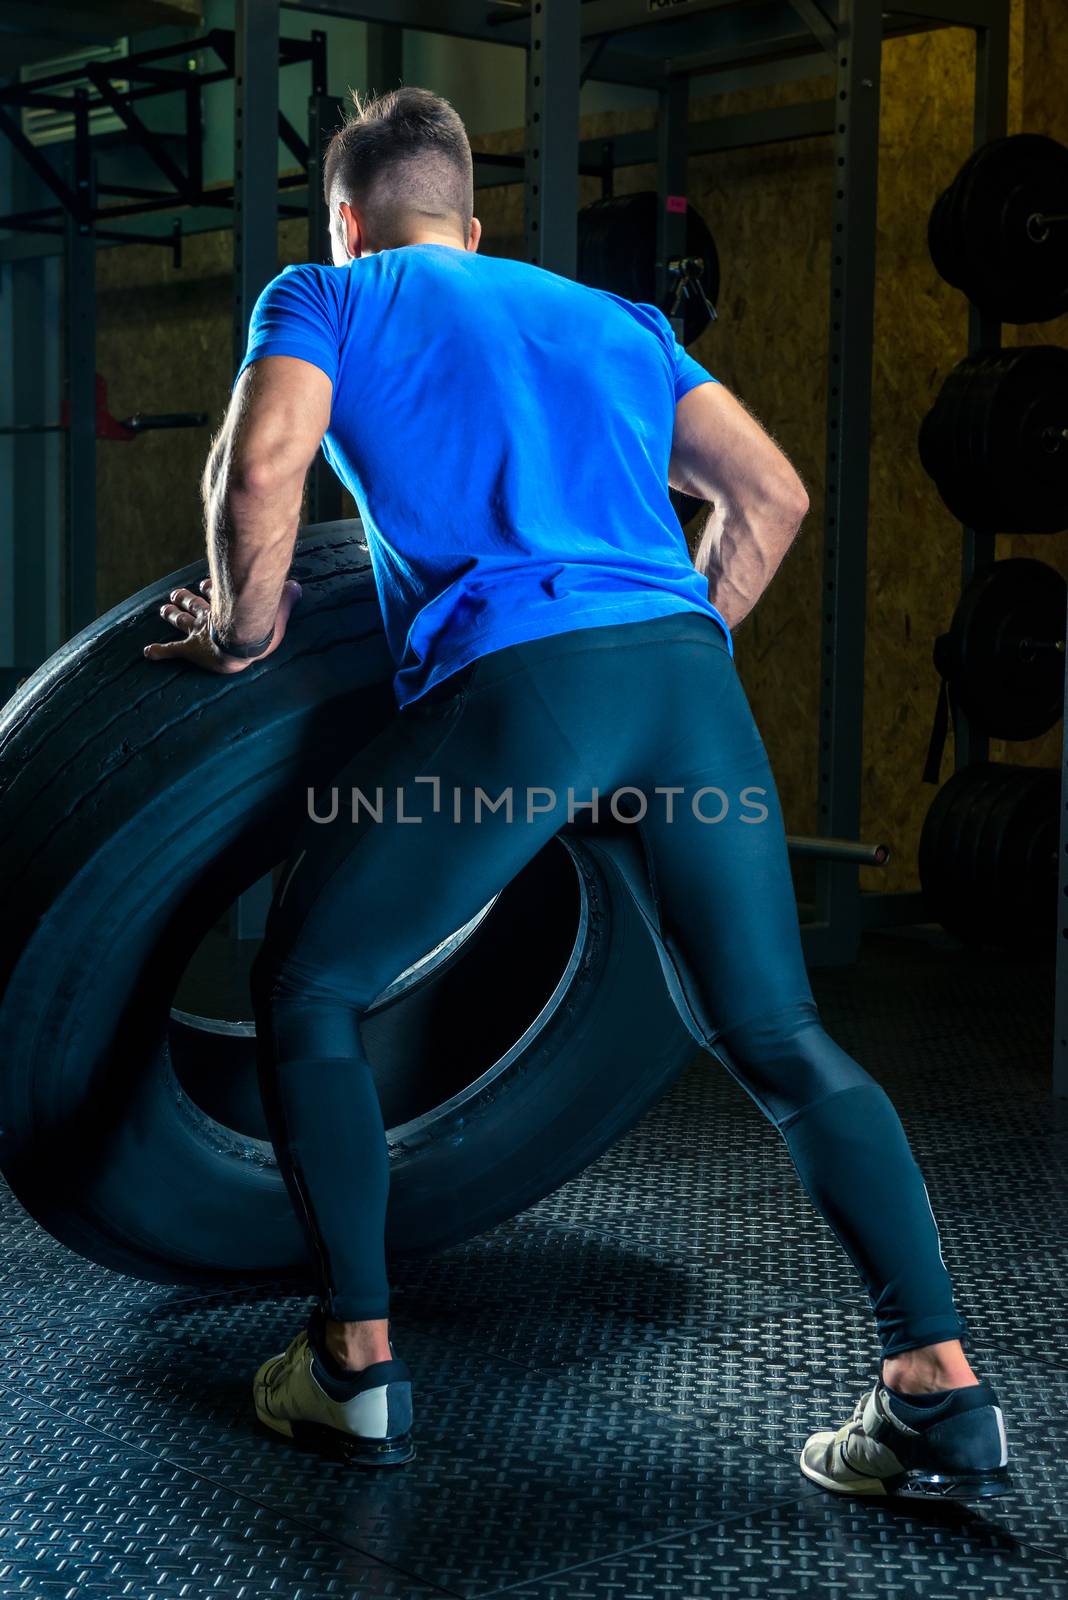 bodybuilder exercises in the gym with a heavy wheel, the view from the back